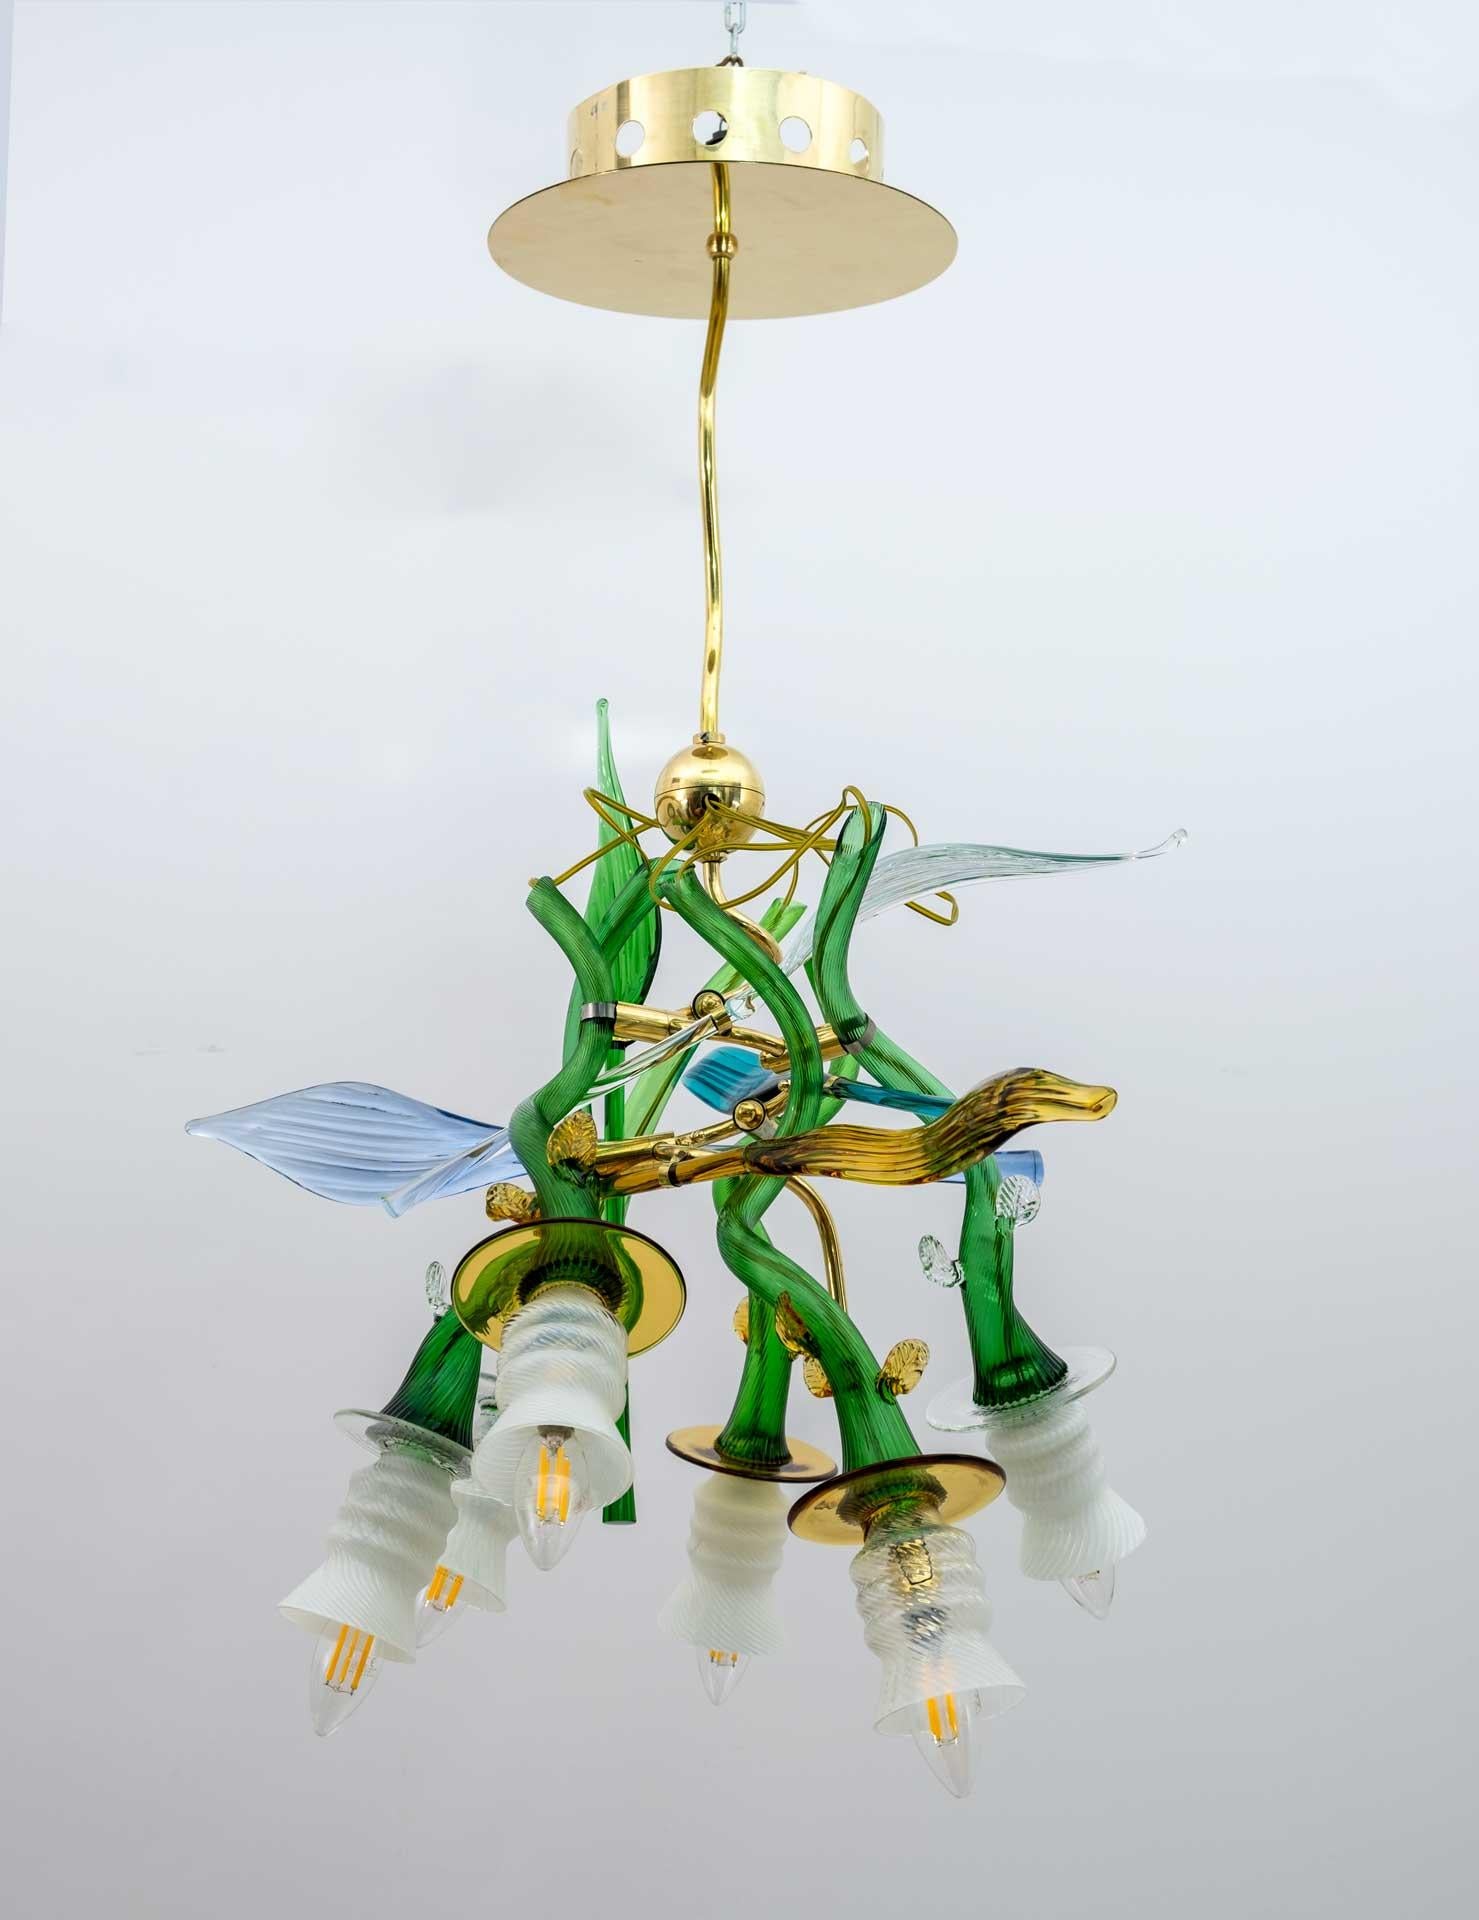 Bohemian Czech Dutch crystal chandelier by designer, architect and artist Borek Sipek (1949-2016). The lamp is published by Driade.
The lamp is a suspension model Luigi I° 1989 ca
brass structure, curved movement arms in green crystal, 5 conical